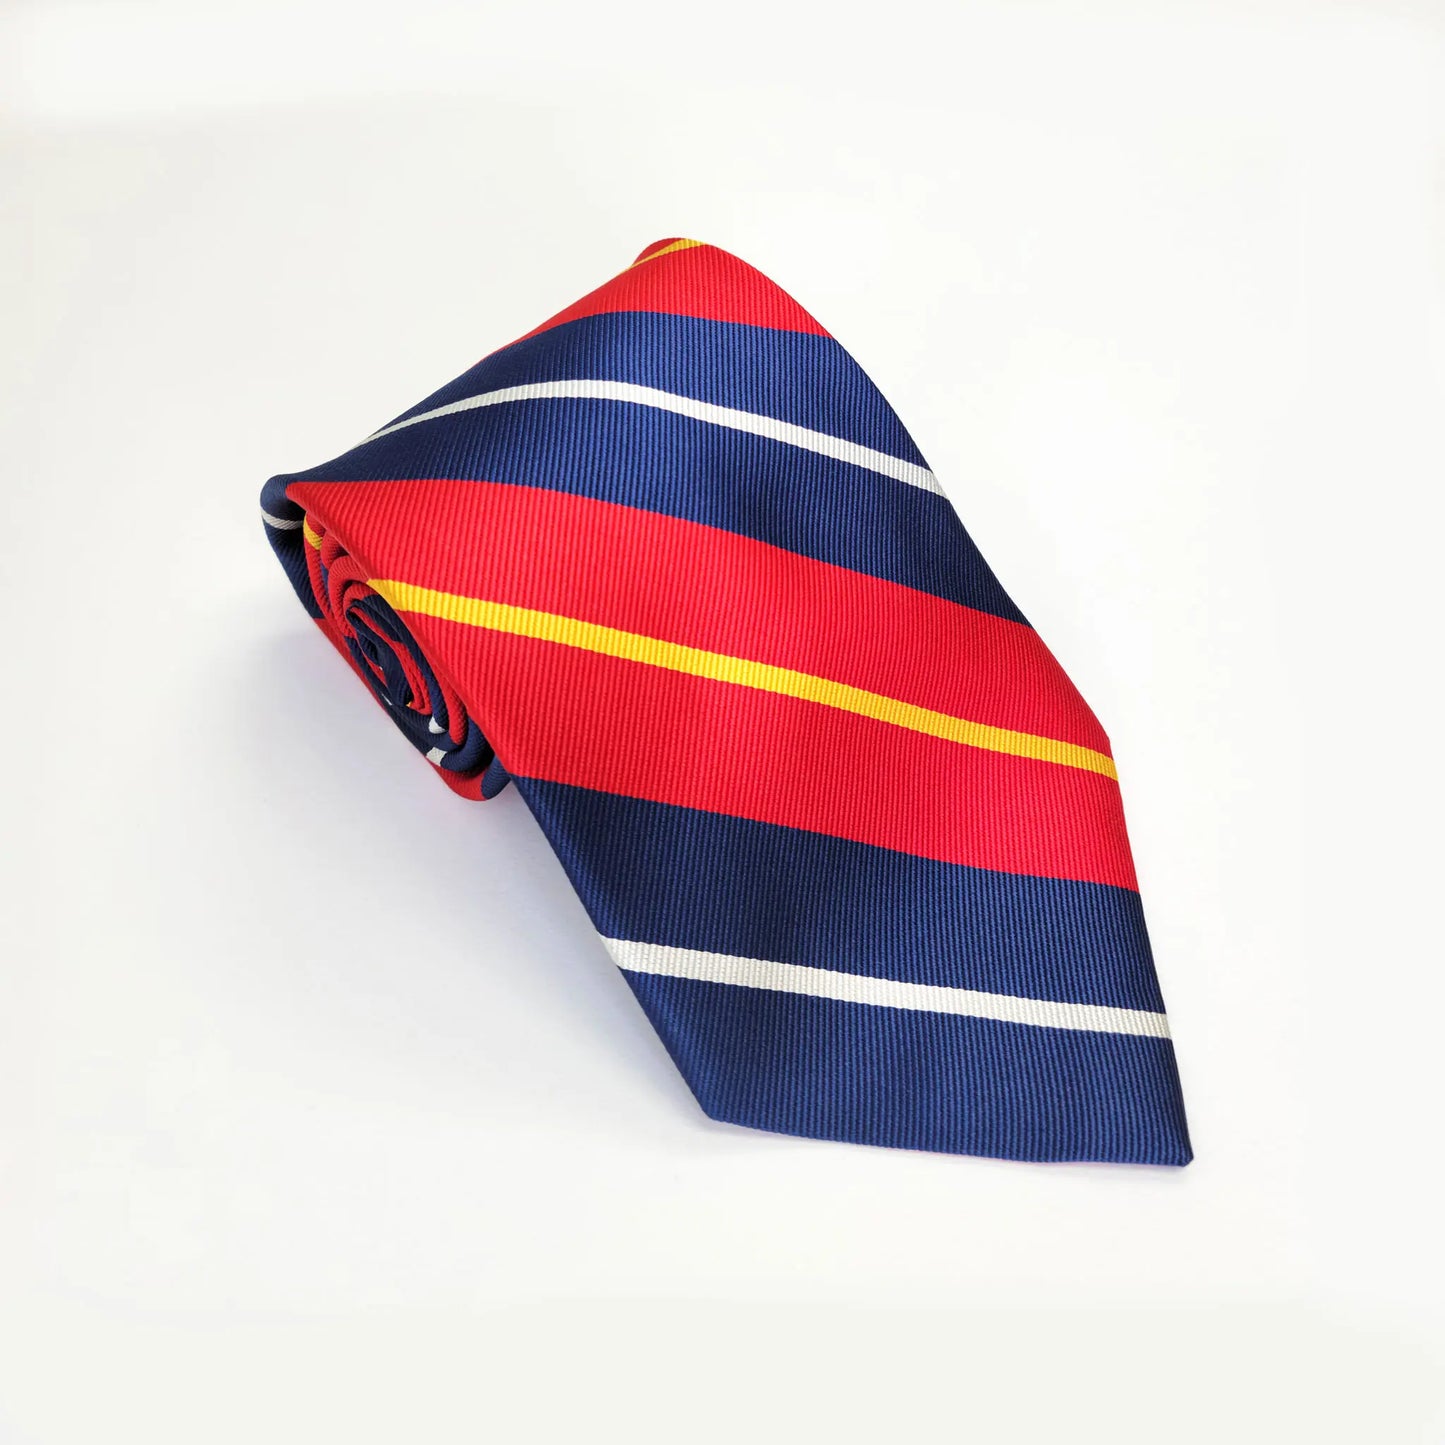 Red, Navy & Yellow Stripe - Larimars Clothing Men's Formal and casual wear shirts